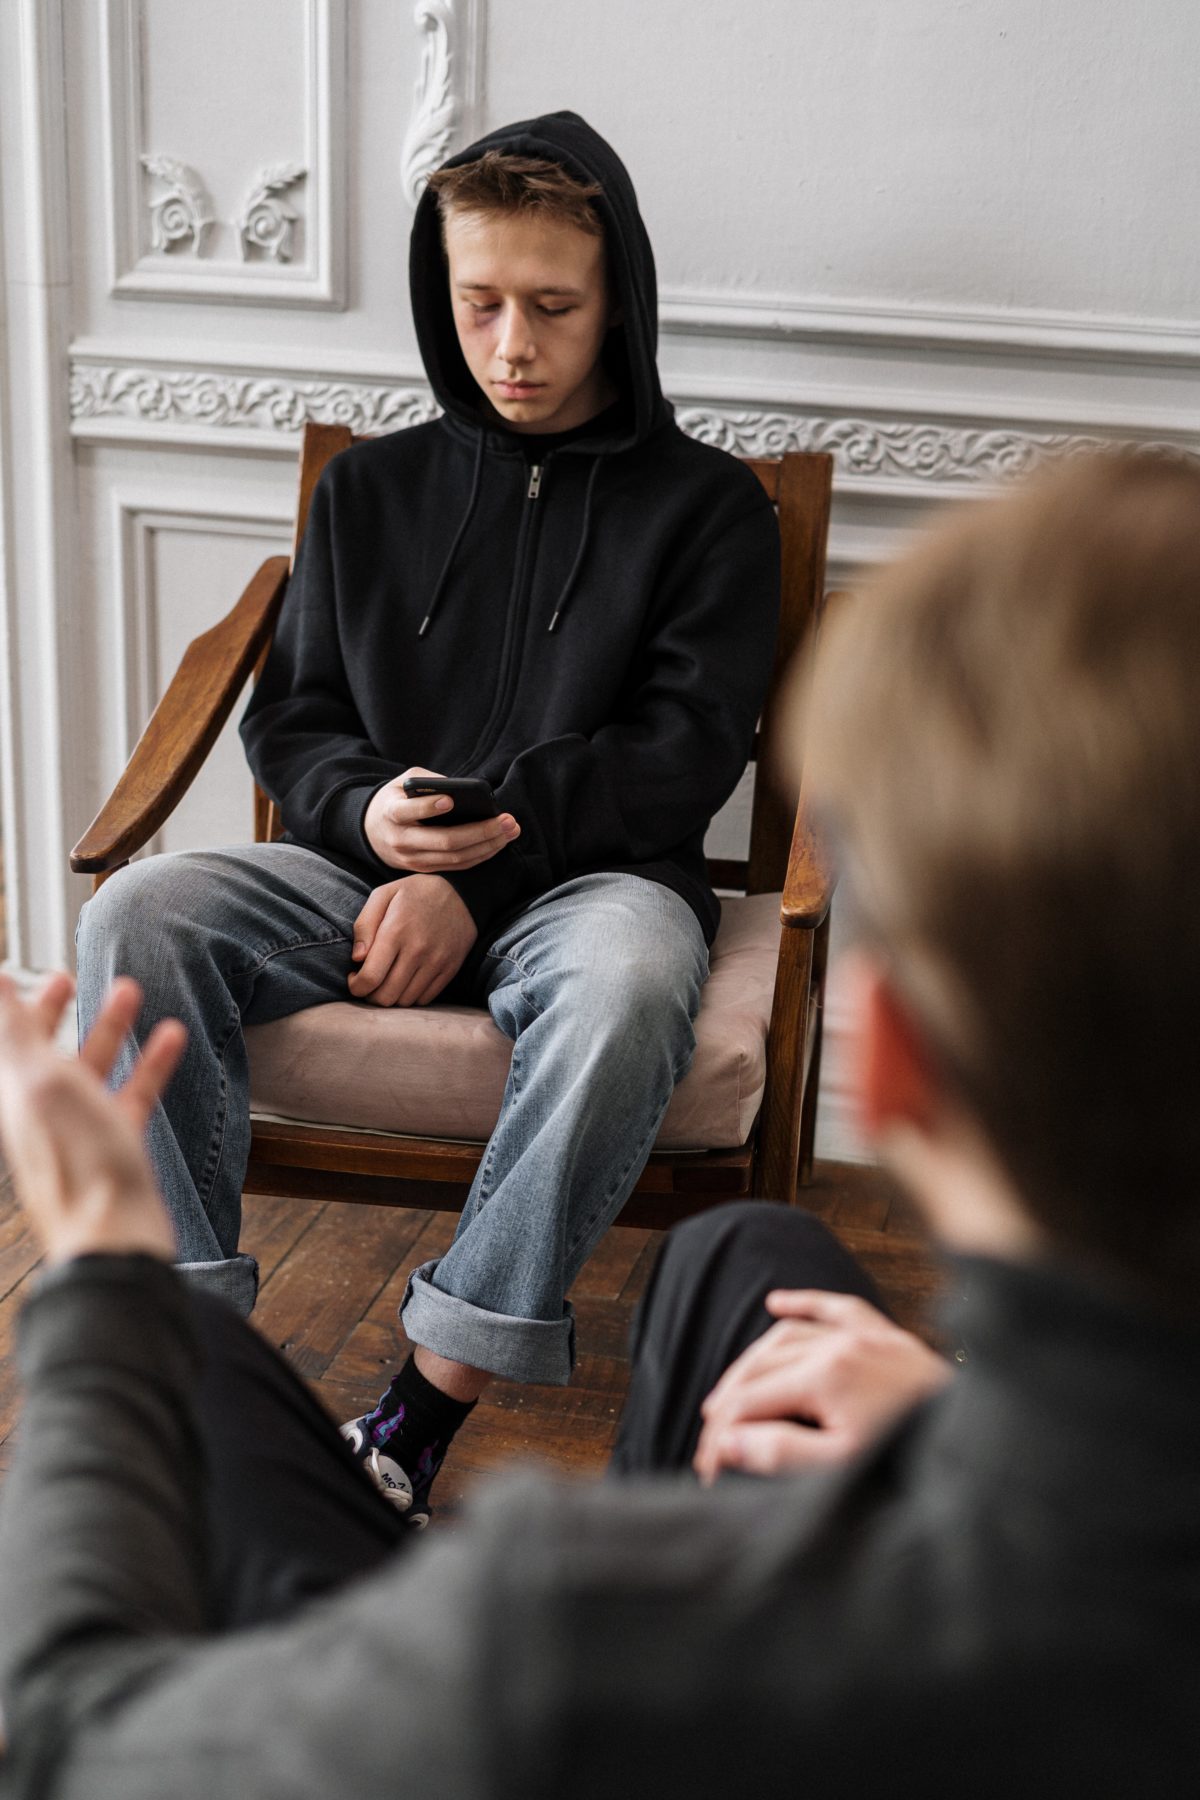 Teenager receiving counselling session